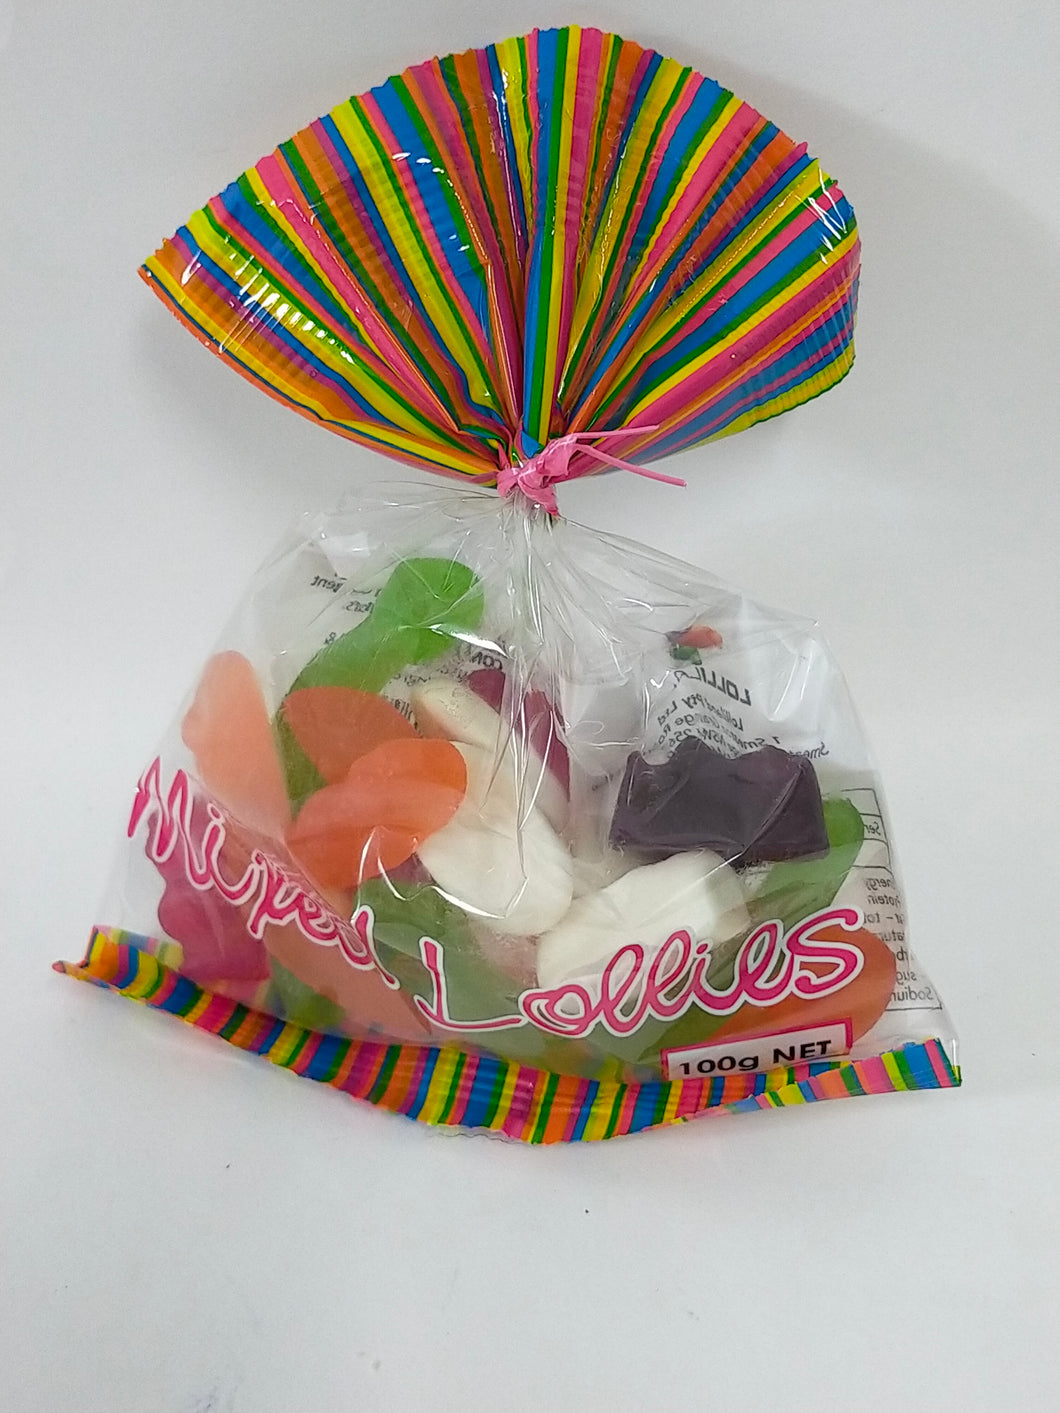 Party Mix Lolly Bags 100g - Sunshine Confectionery